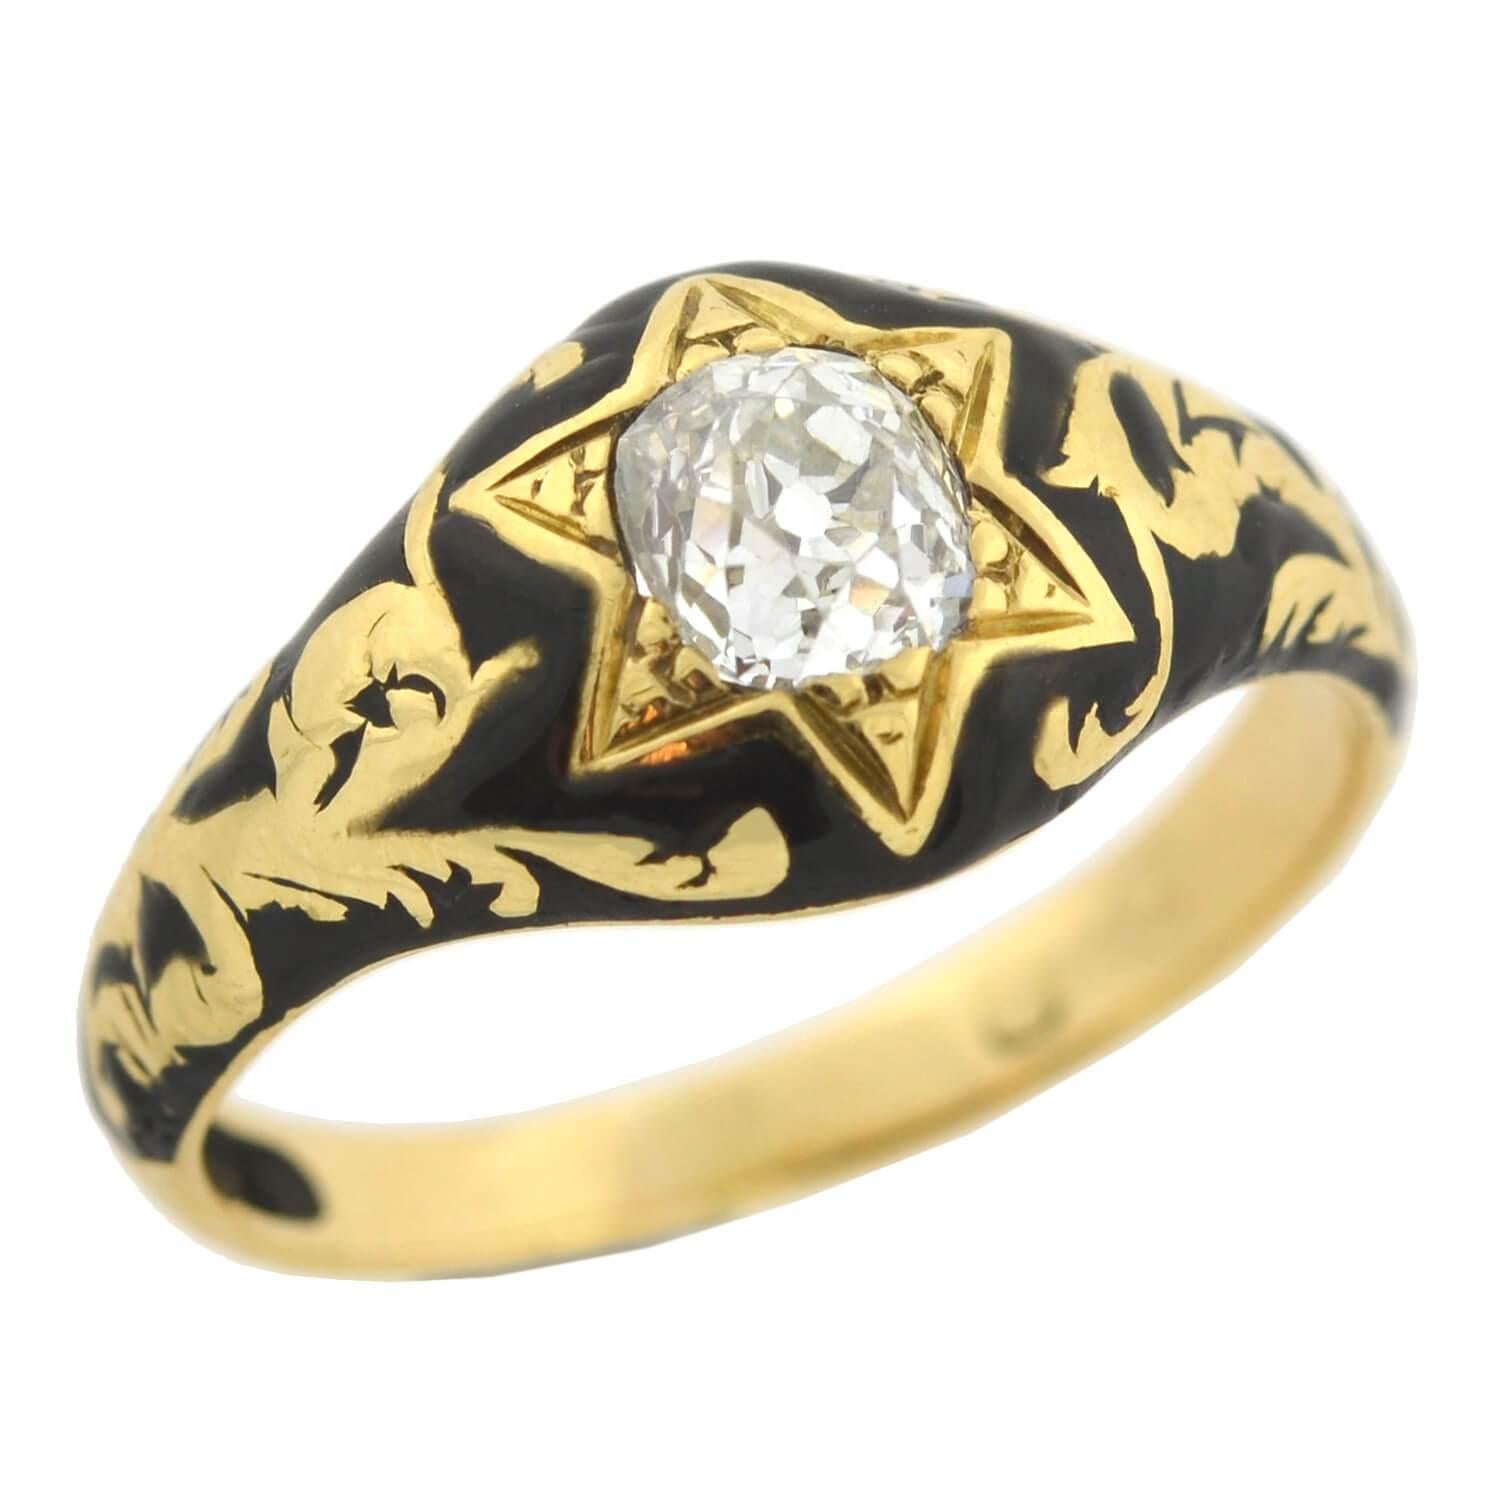 An outstanding diamond ring from the Victorian (ca1880) era! This fantastic piece is crafted in vibrant 18kt yellow gold, and has an impressive enameled design. Resting at the center is a gorgeous six-point star engraved motif which holds a